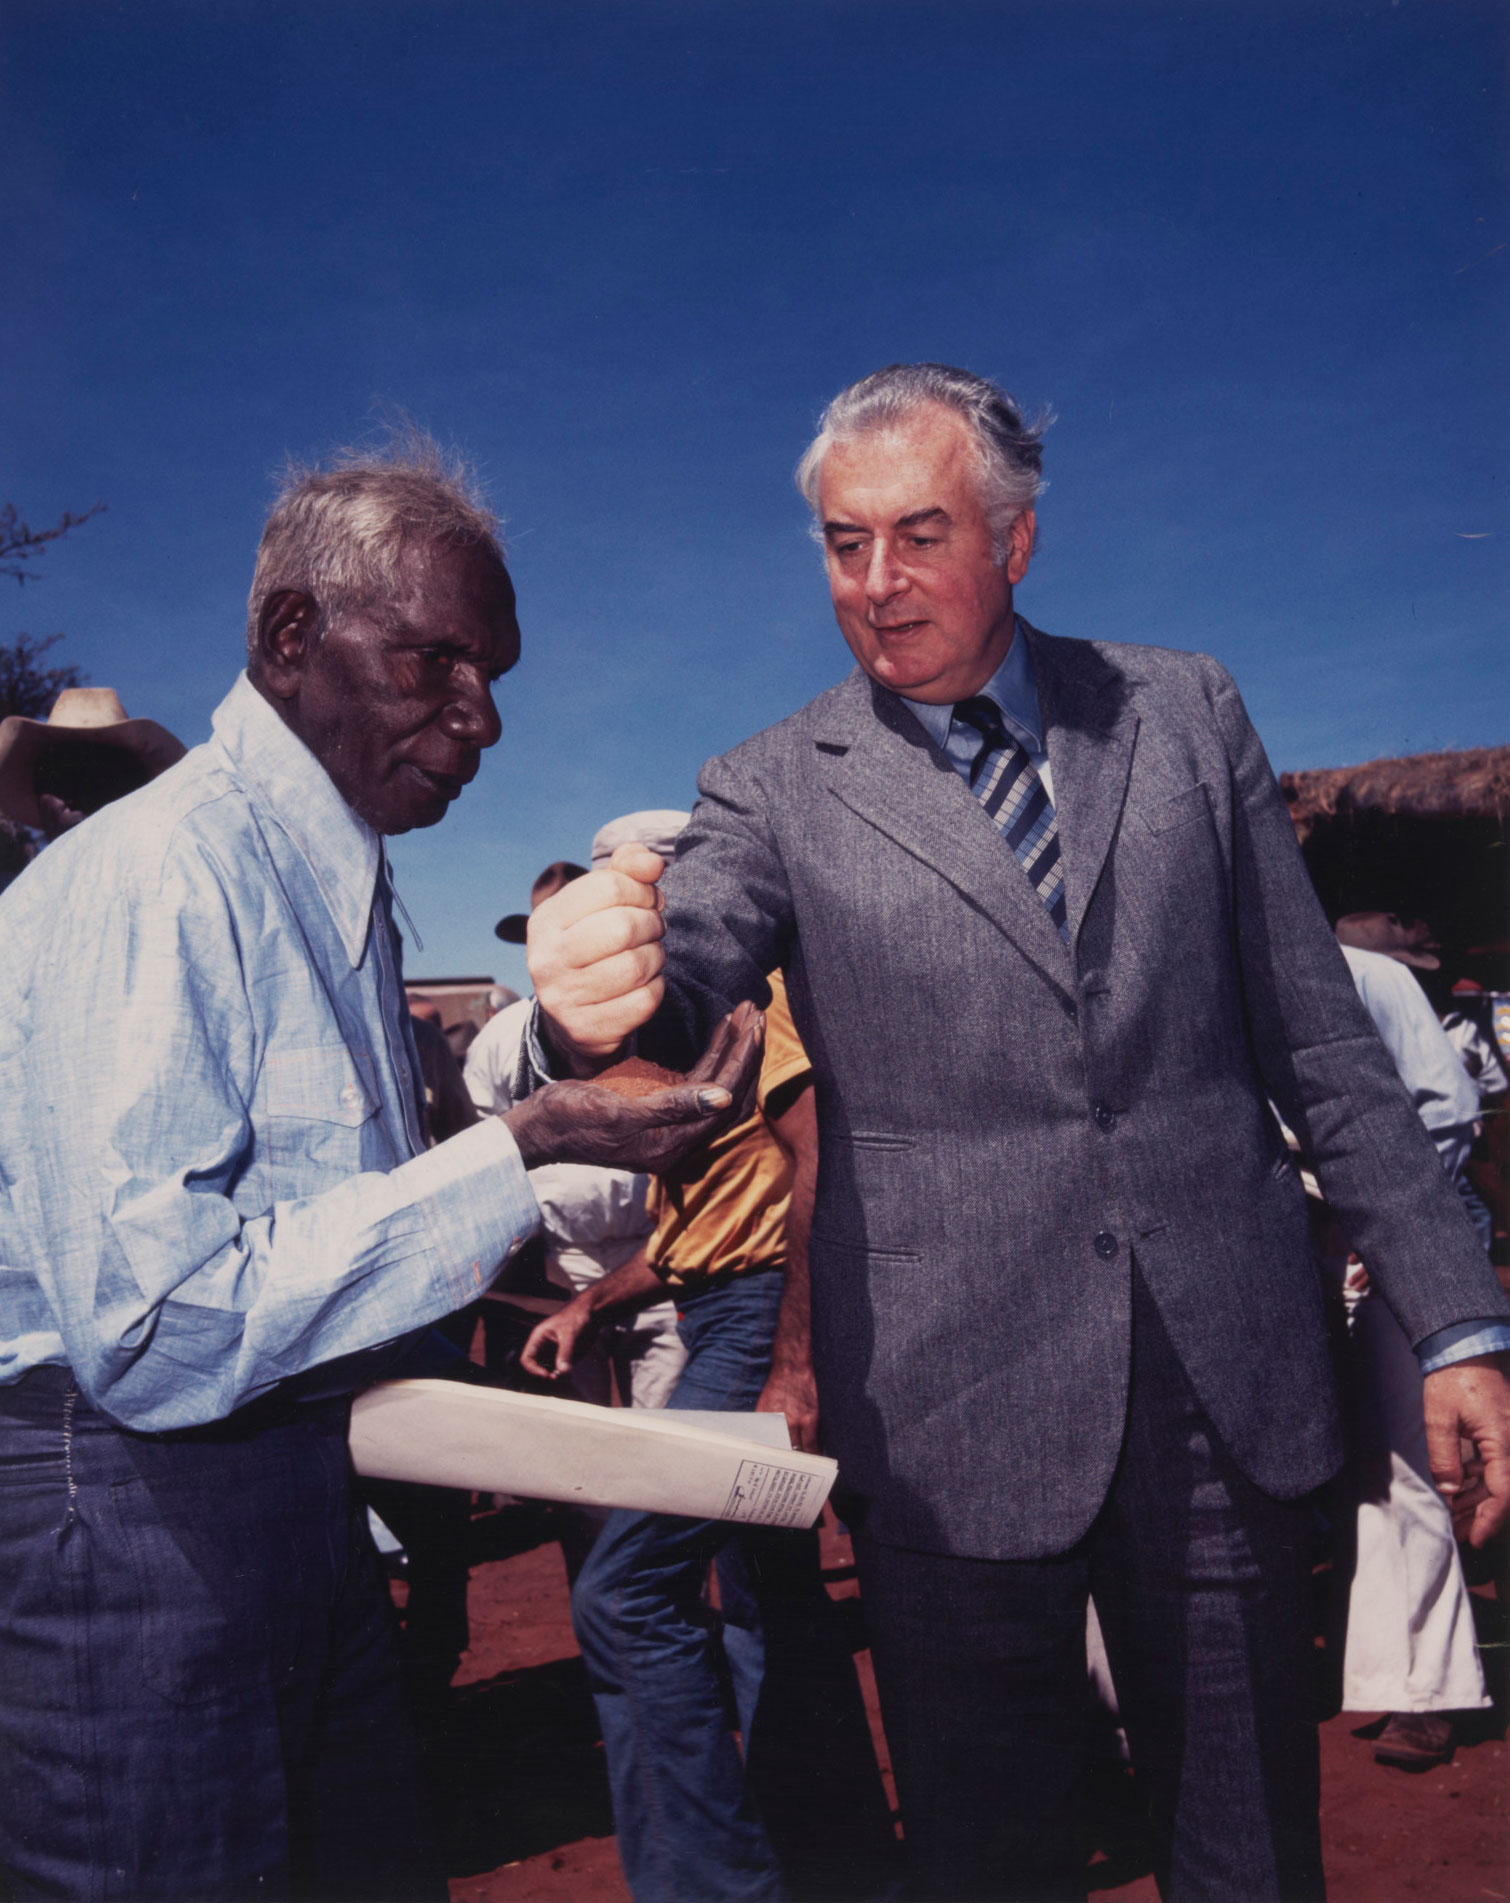 <p>Gough Whitlam pouring a handful of red soil into the hands of Vincent Lingiari, by Mervyn Bishop, 1975</p>
